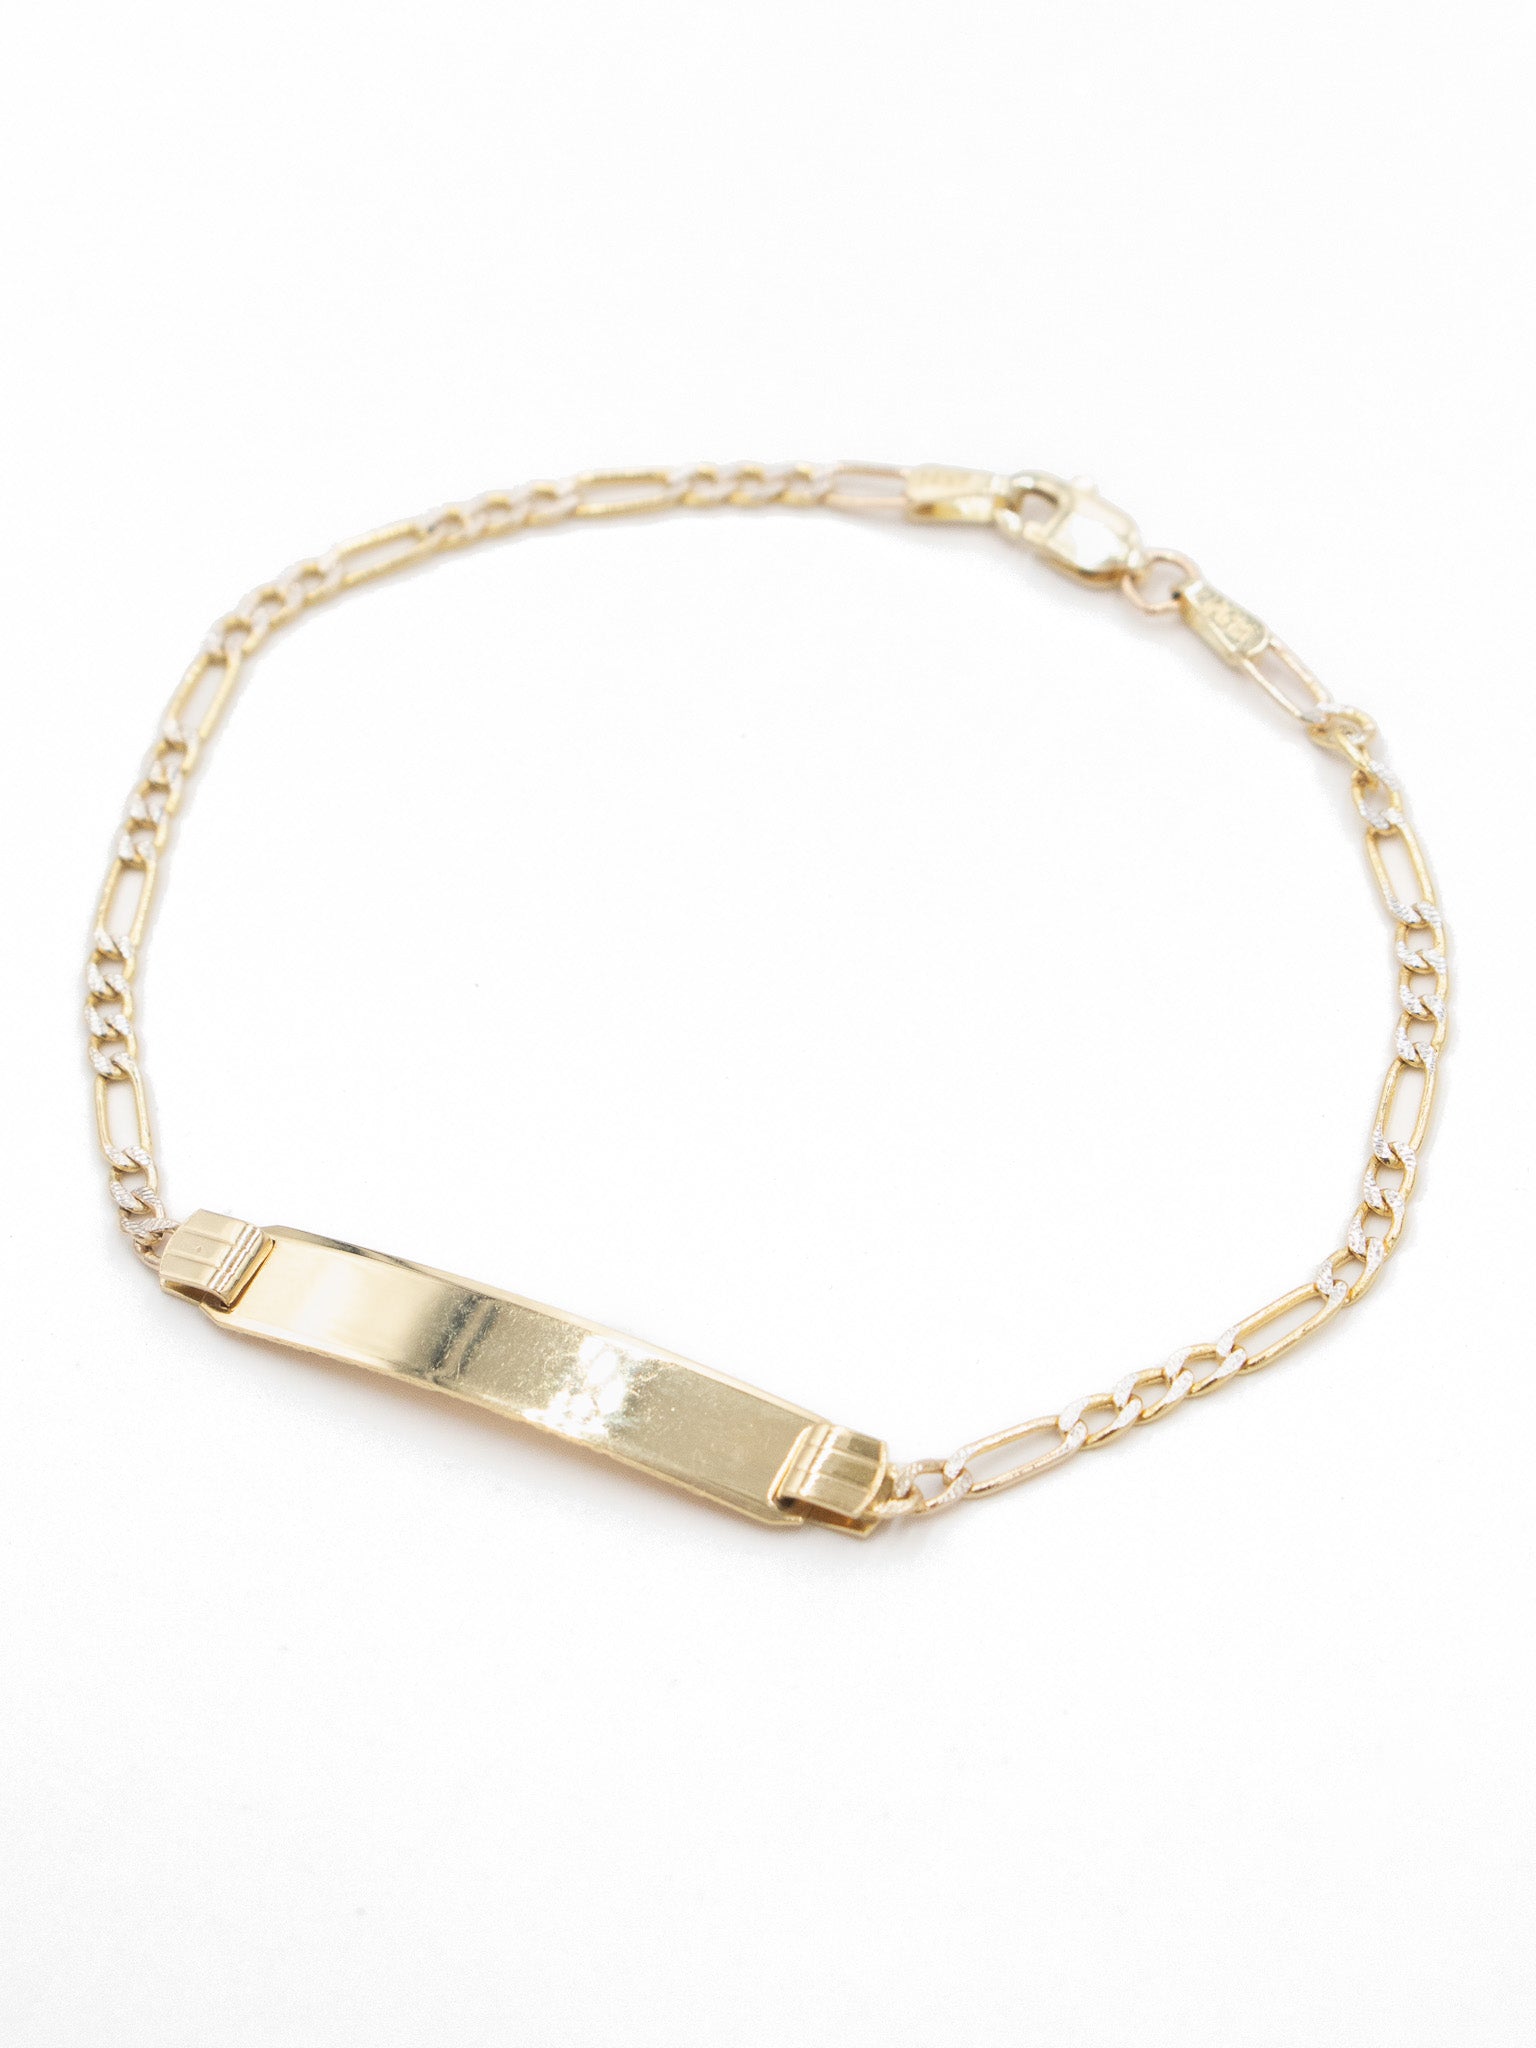 14K Gold Figaro ID Bracelet with White Gold Details